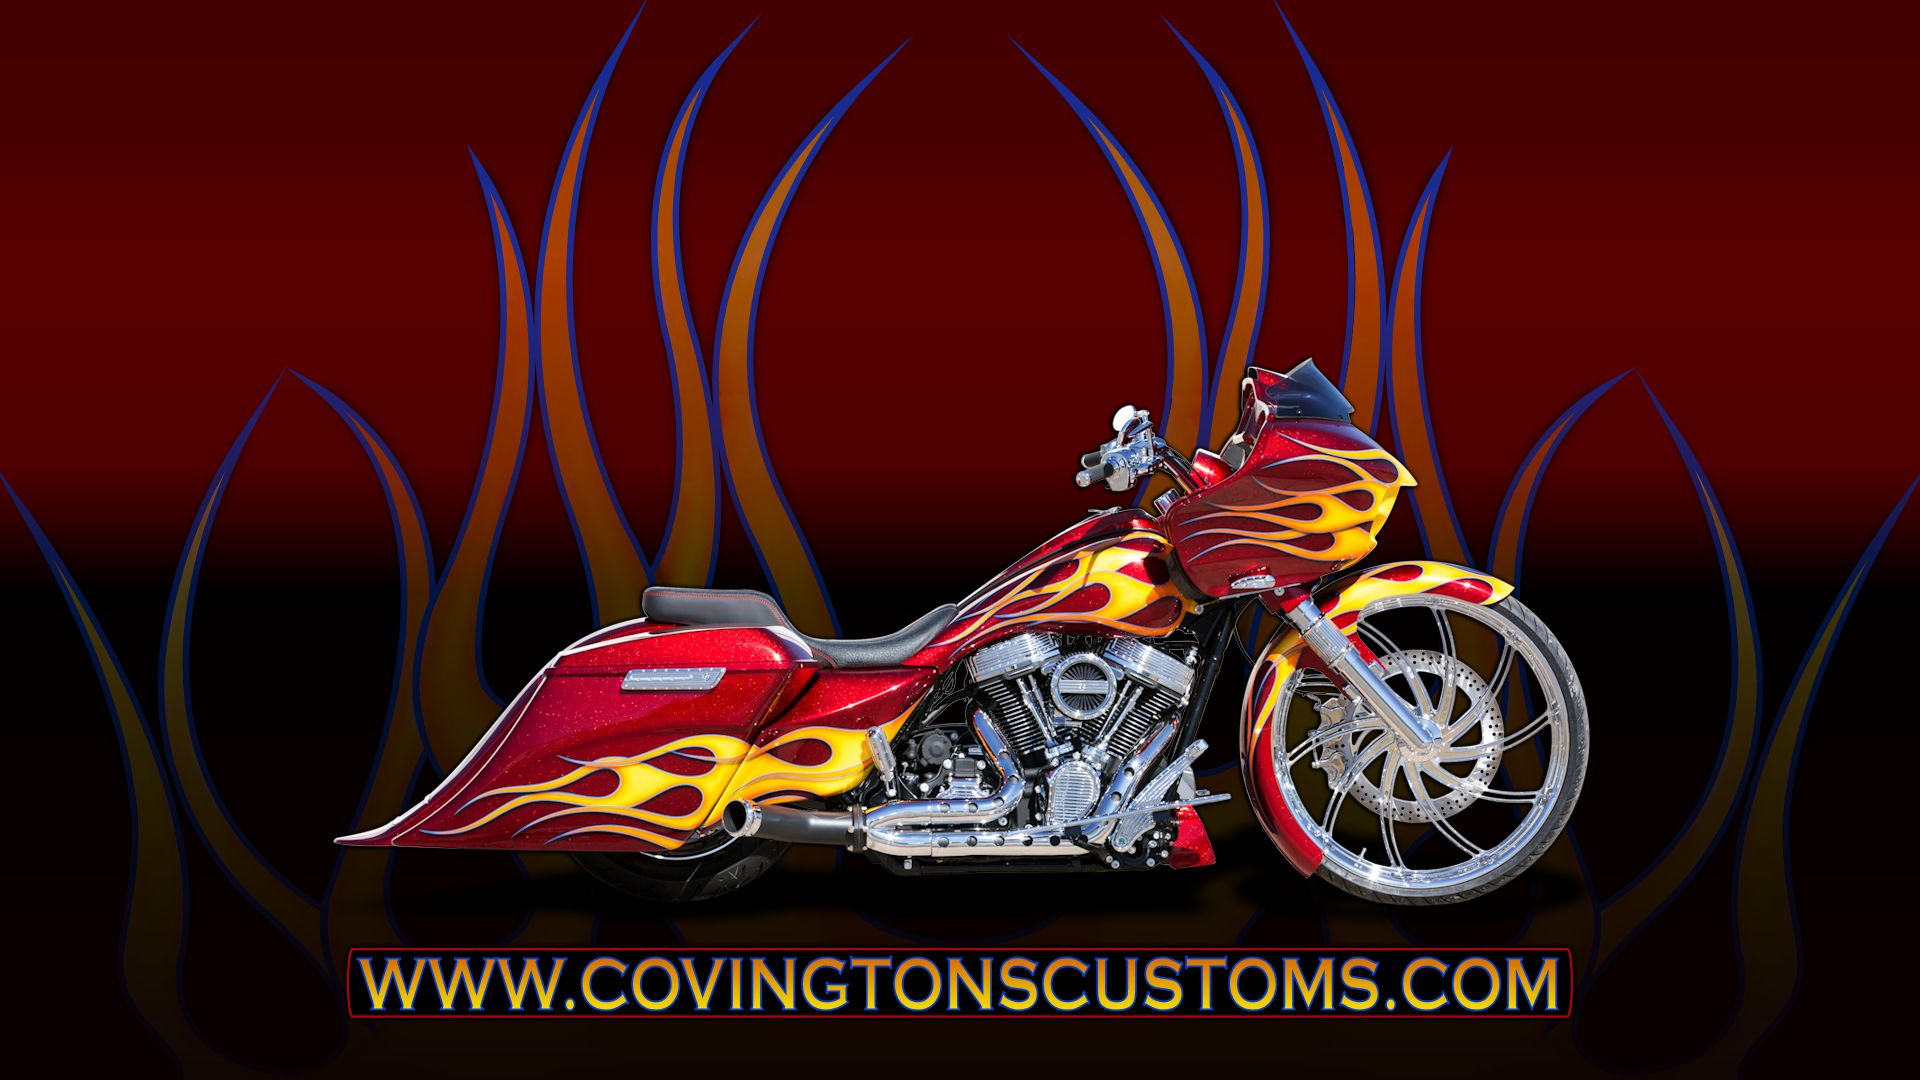 Covington's Motorcycle WallPapers Gallery